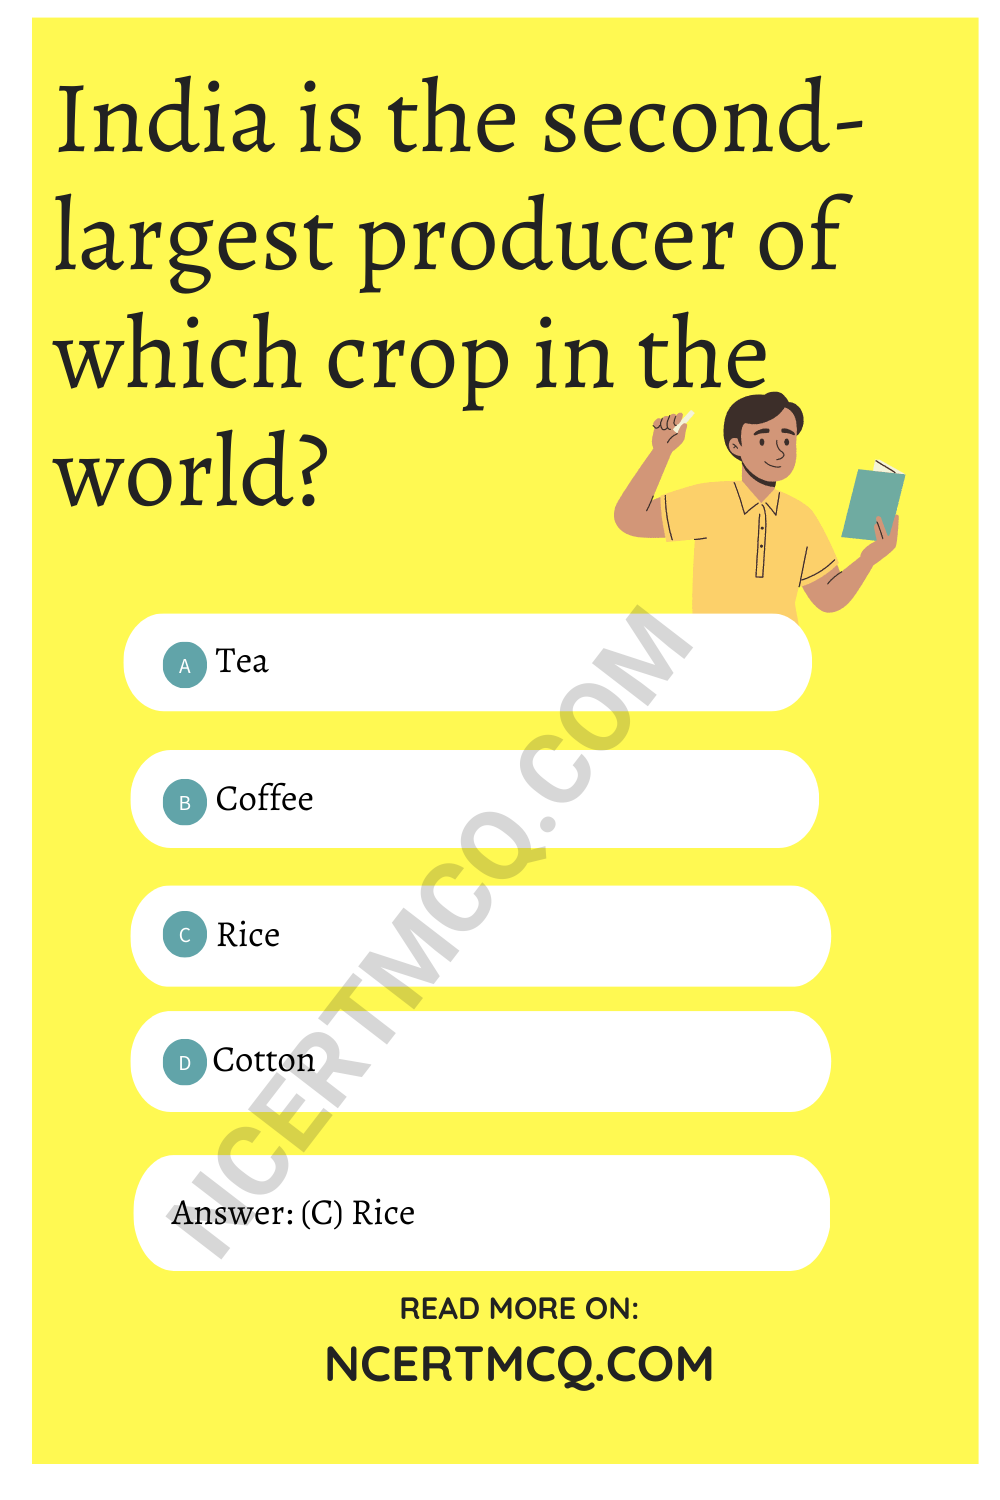 India is the second-largest producer of which crop in the world?